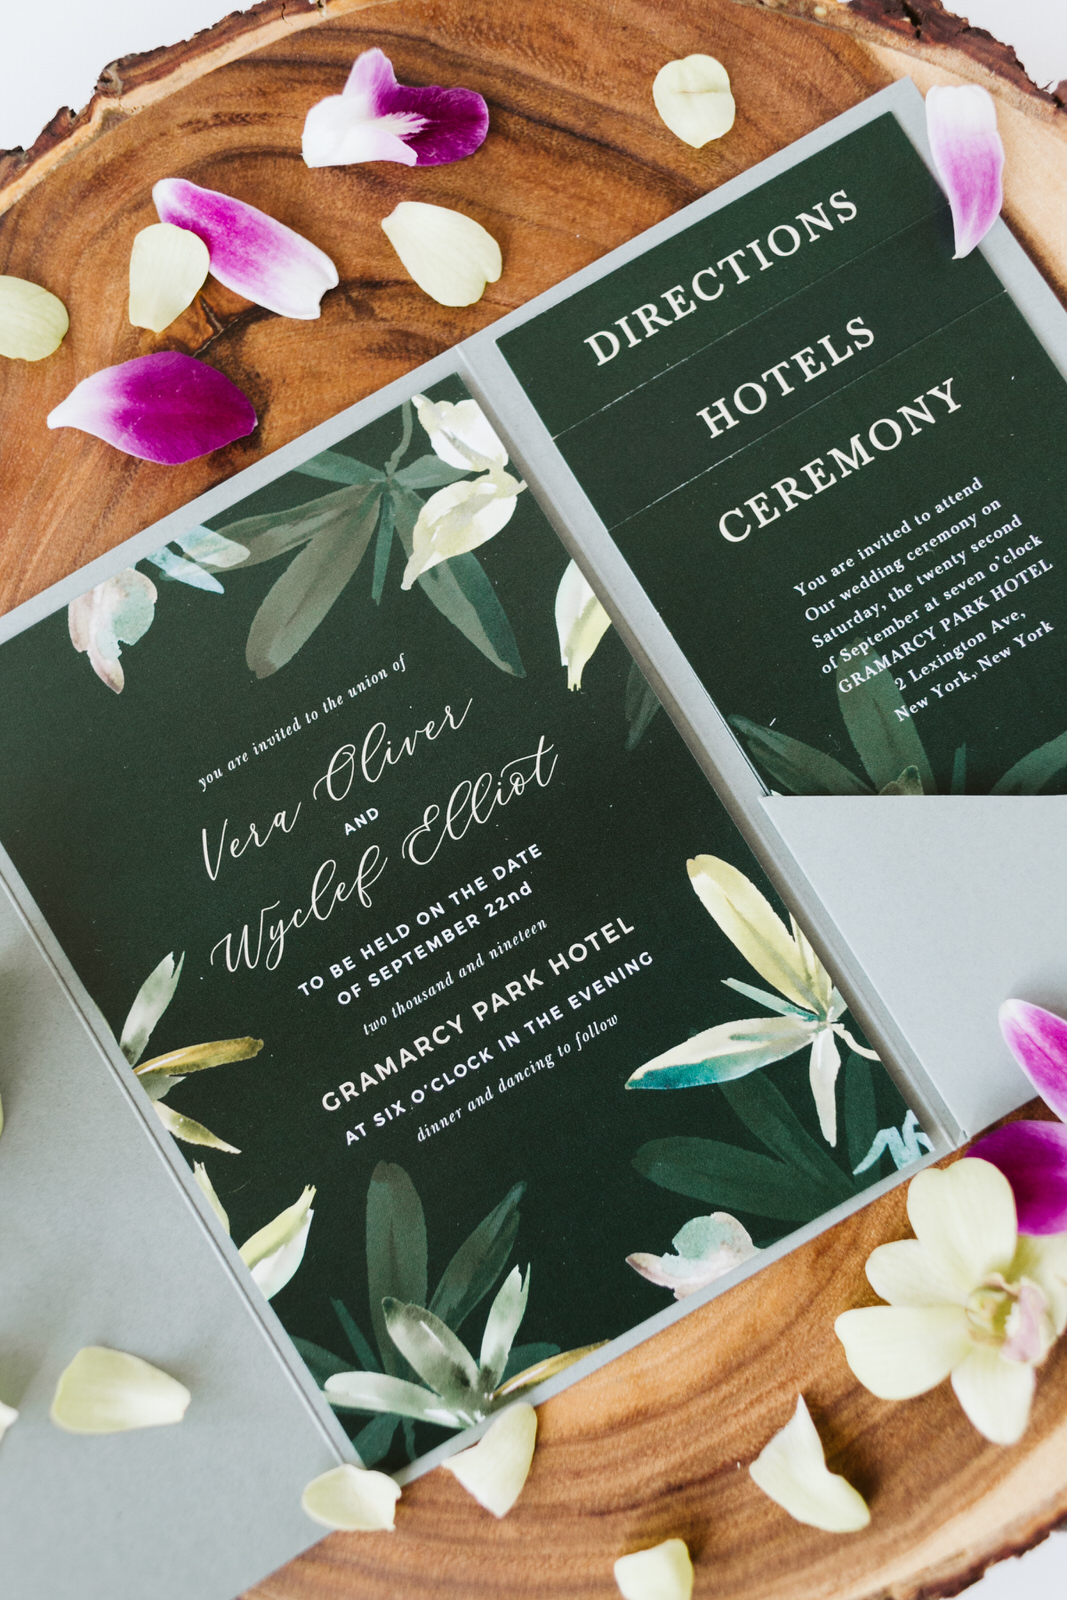 Wedding Stationary Hawaii orchid petals Wooden Basic invite Block directions Ceremony